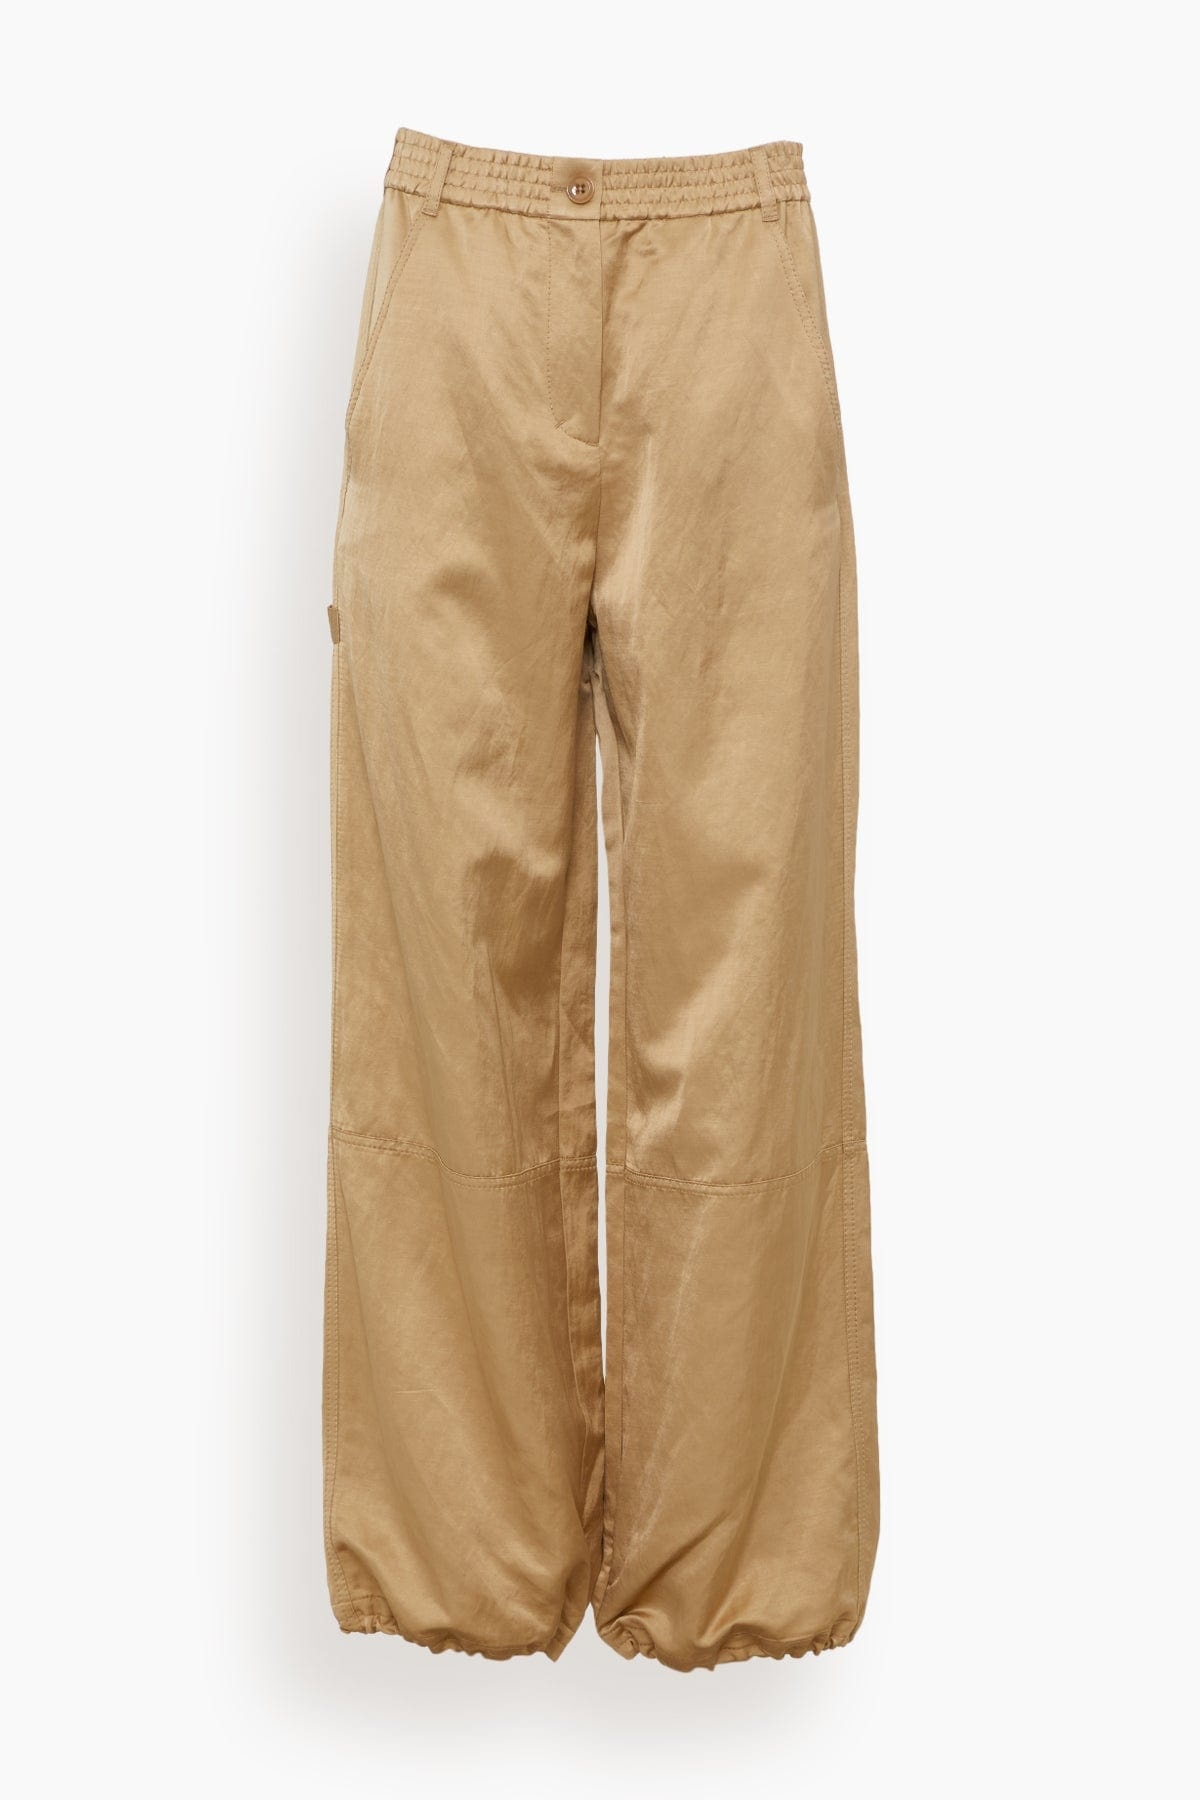 Slouchy Coolness Cargo Pant in Warm Beige - 1